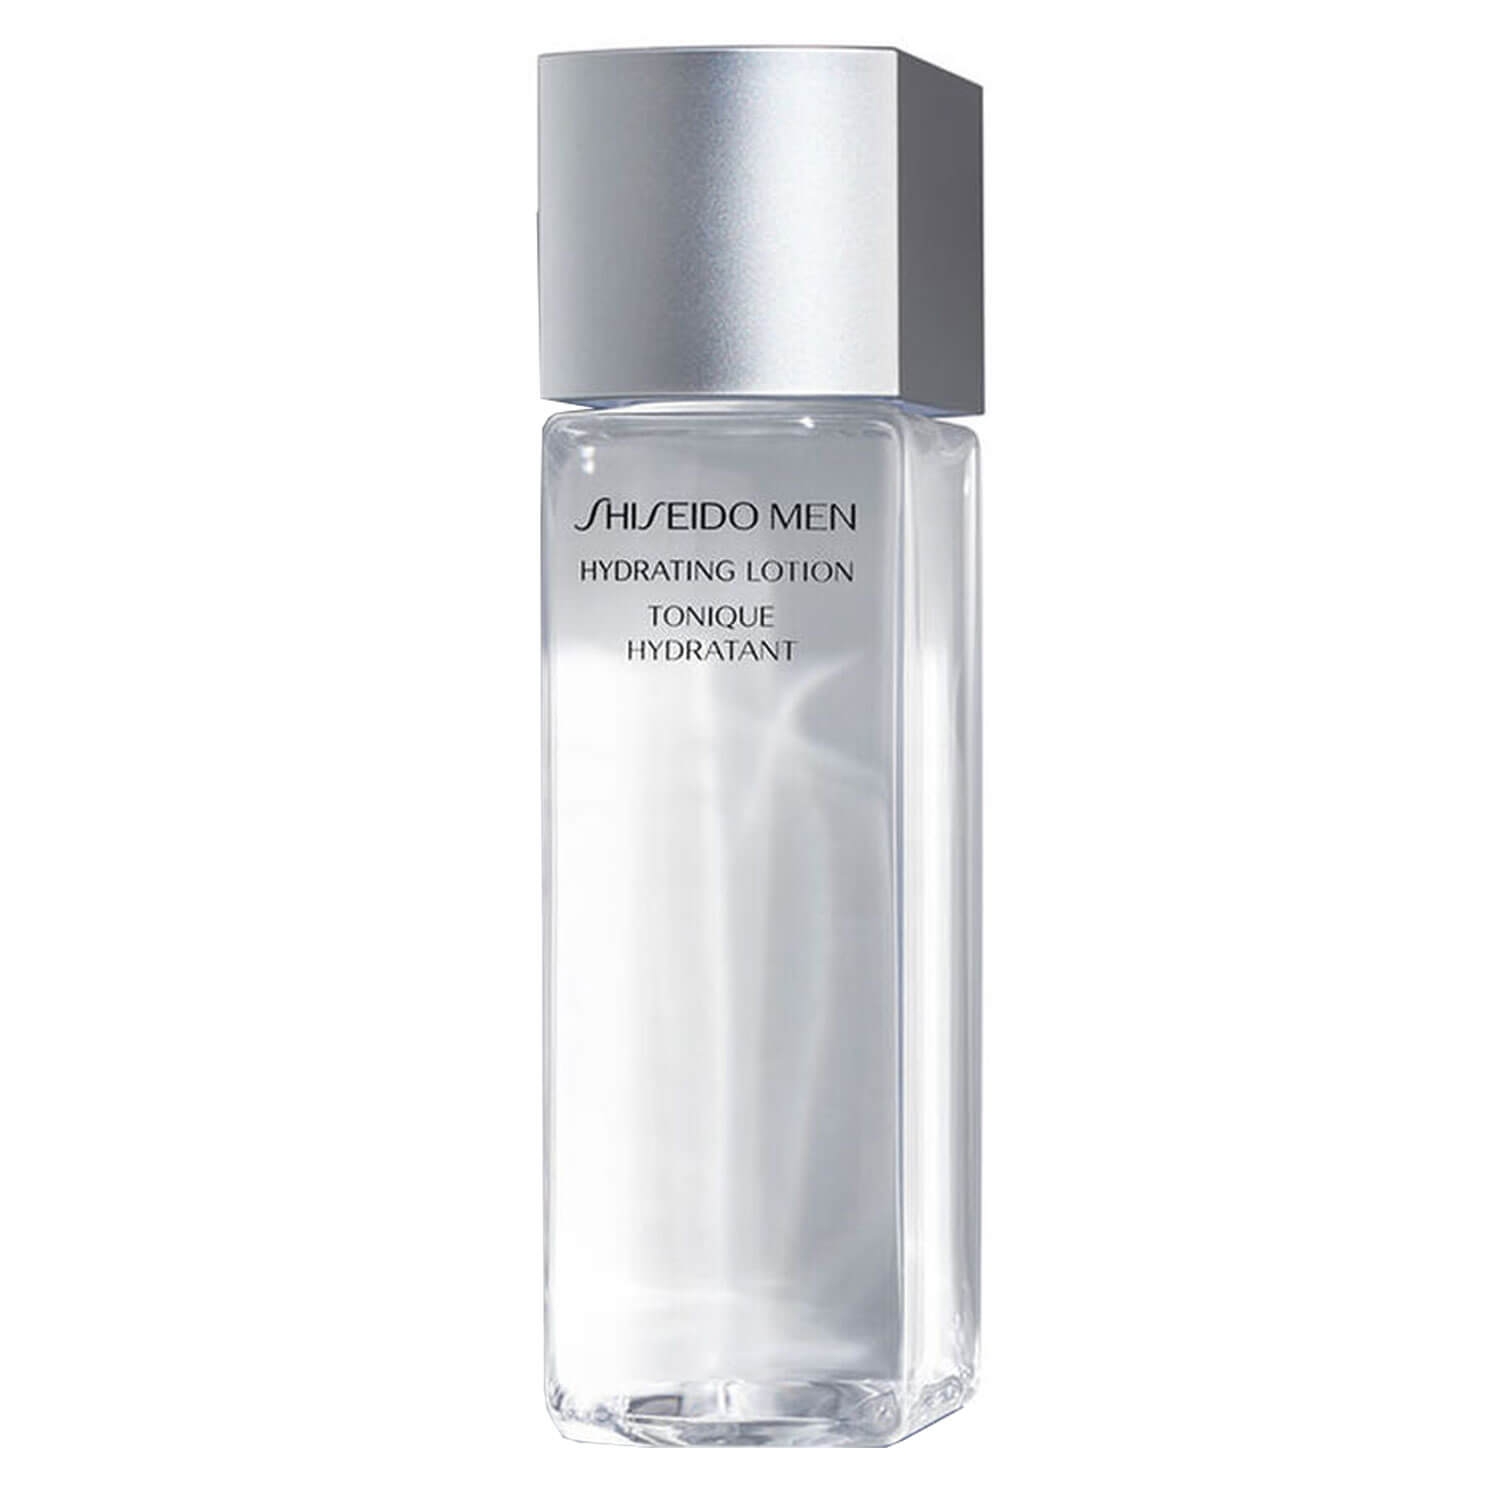 Product image from Shiseido Men - Hydrating Lotion